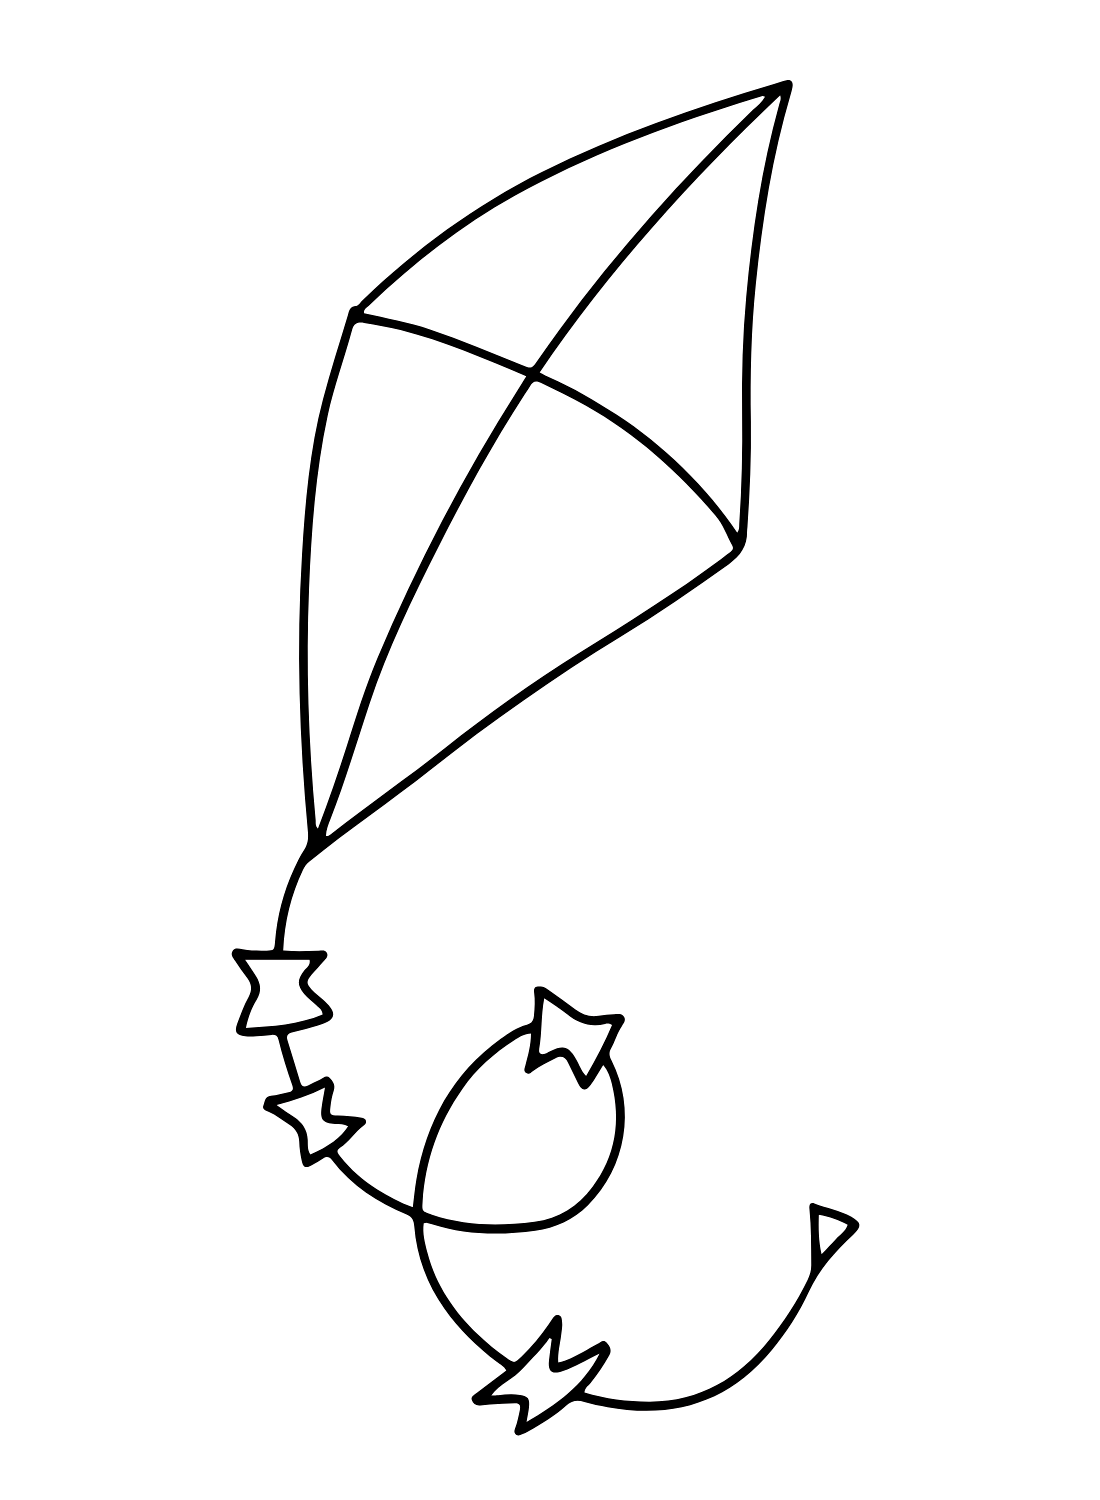 Kite Drawing Coloring Page